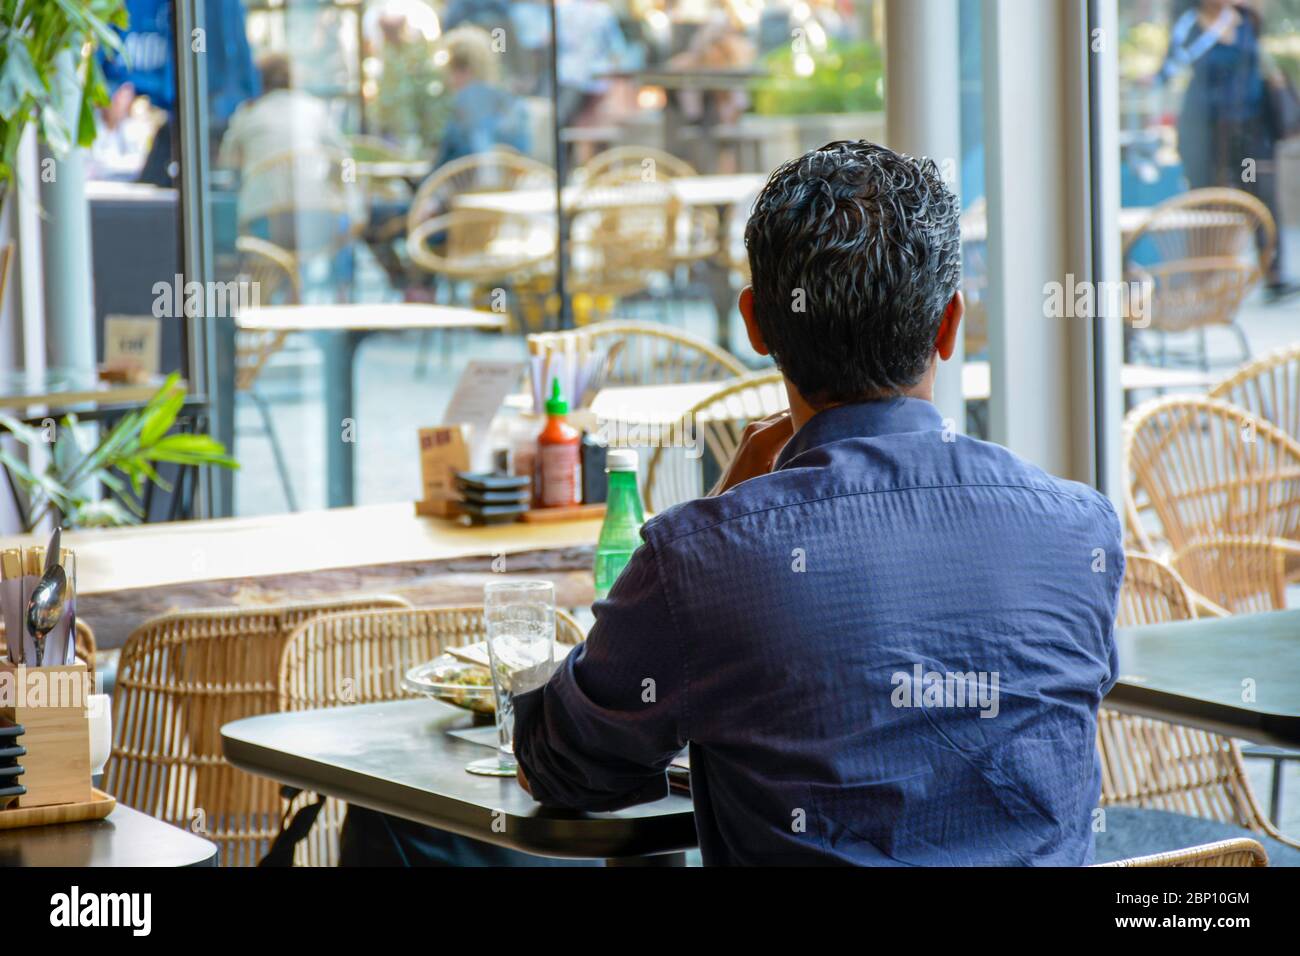 Man from behind sits alone in a modern cafe restaurant and looks outside. He is waiting for his companion to return. There is no one else around him. Stock Photo